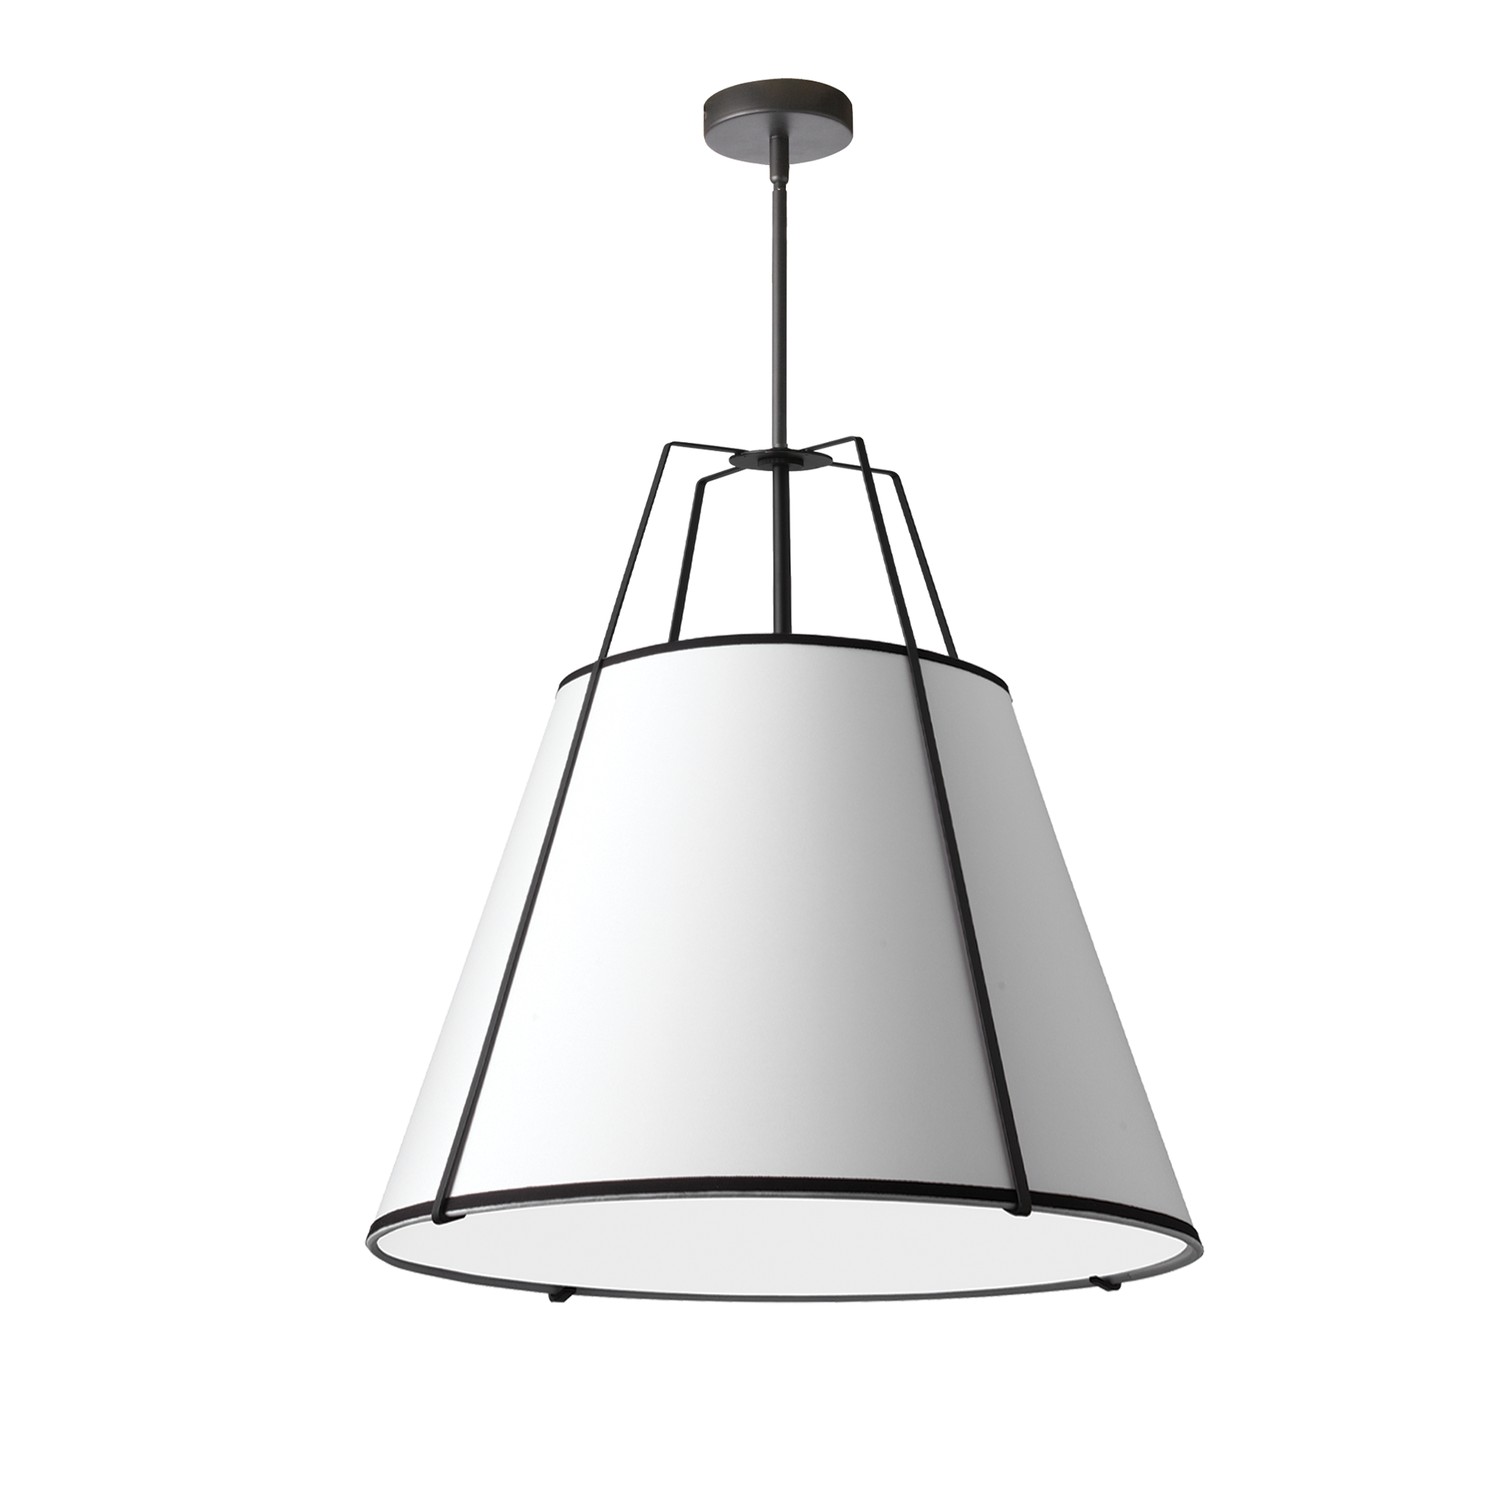 3LT Trapezoid Pendant BK Wh Shade w/ 790 Diff